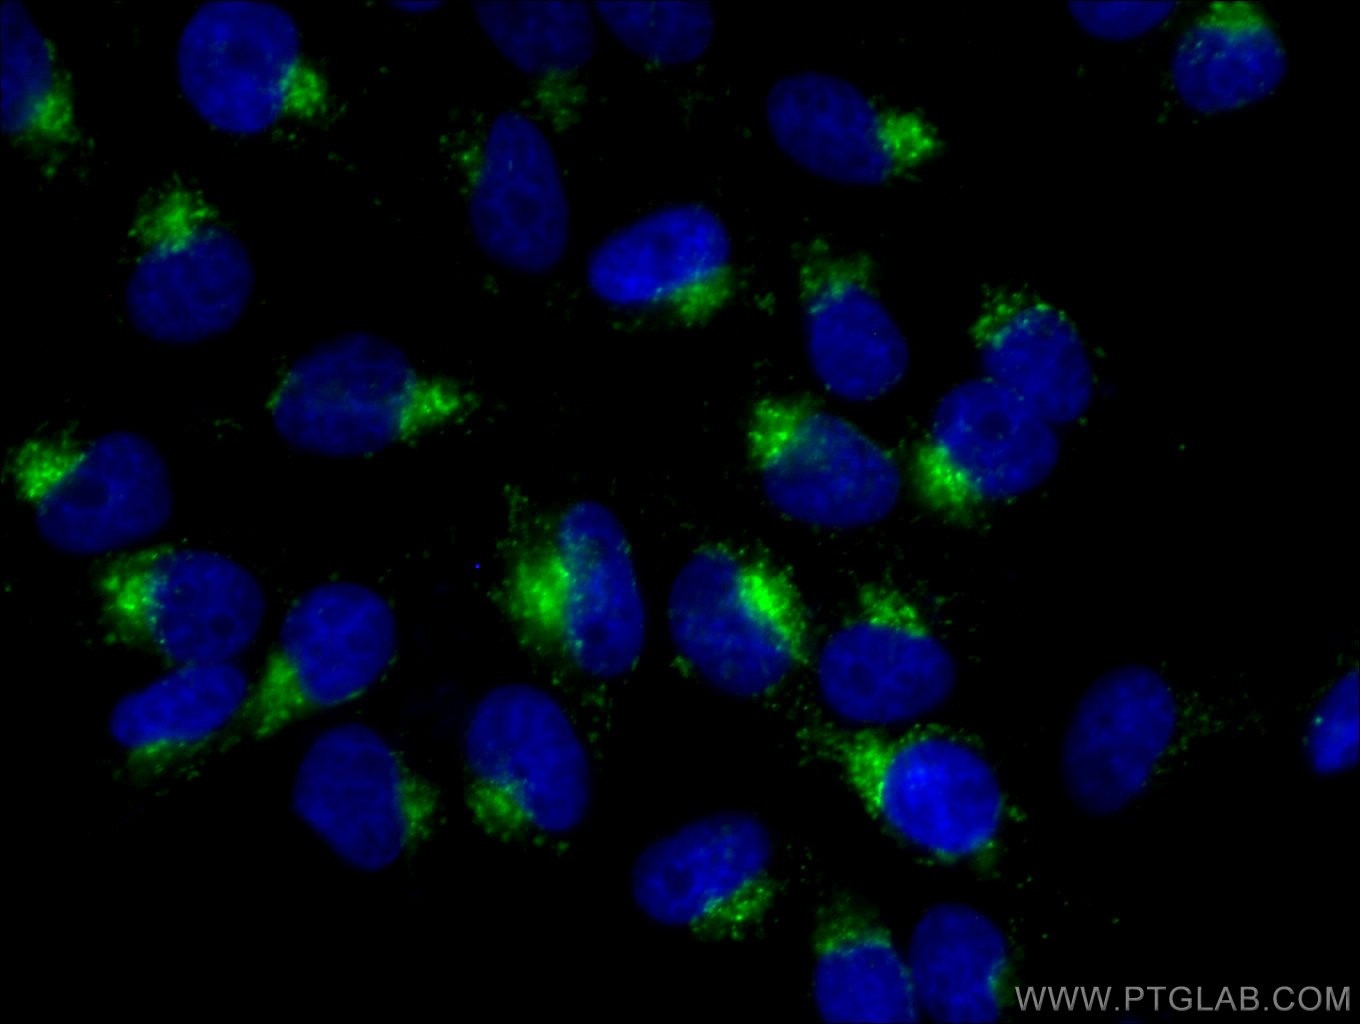 Immunofluorescence (IF) / fluorescent staining of HeLa cells using Anti-Human CD107a / LAMP1 (H4A3) (65051-1-Ig)